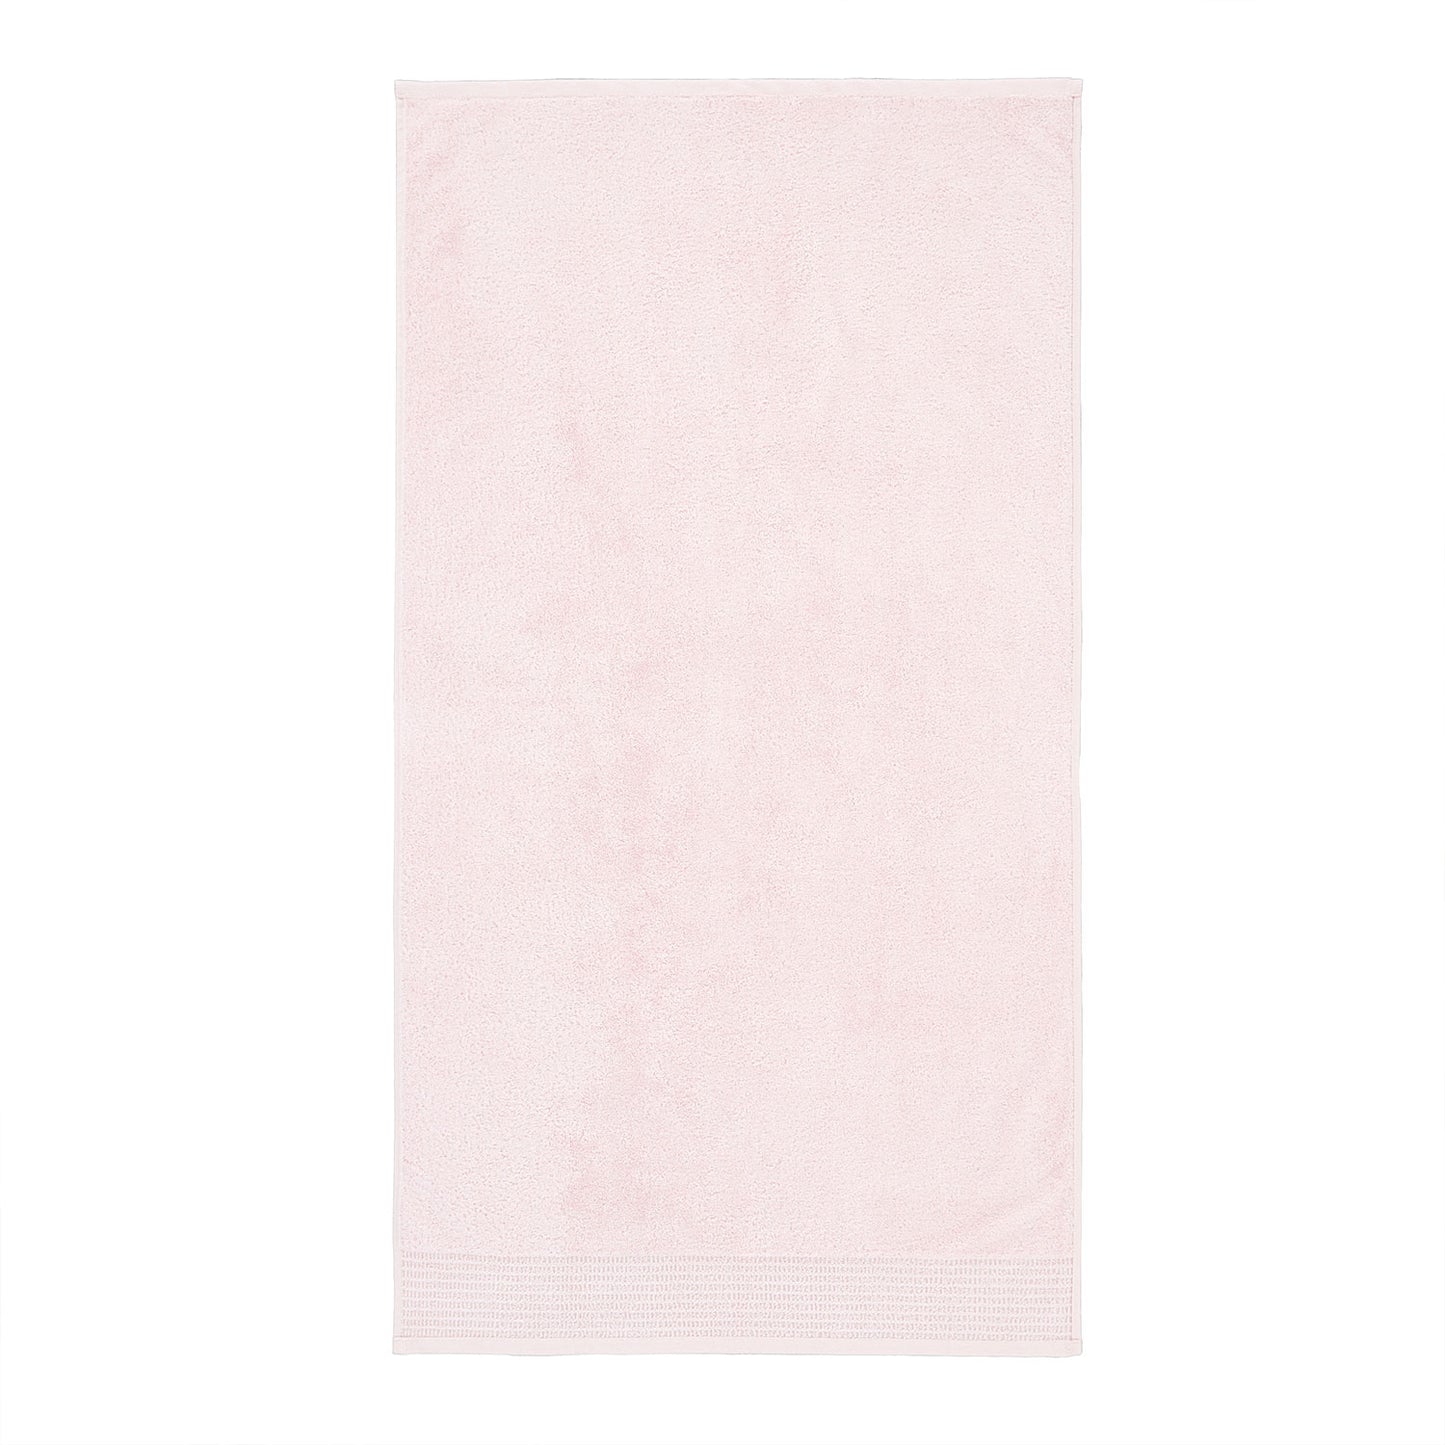 Bianca Pink Egyptian Cotton Towels